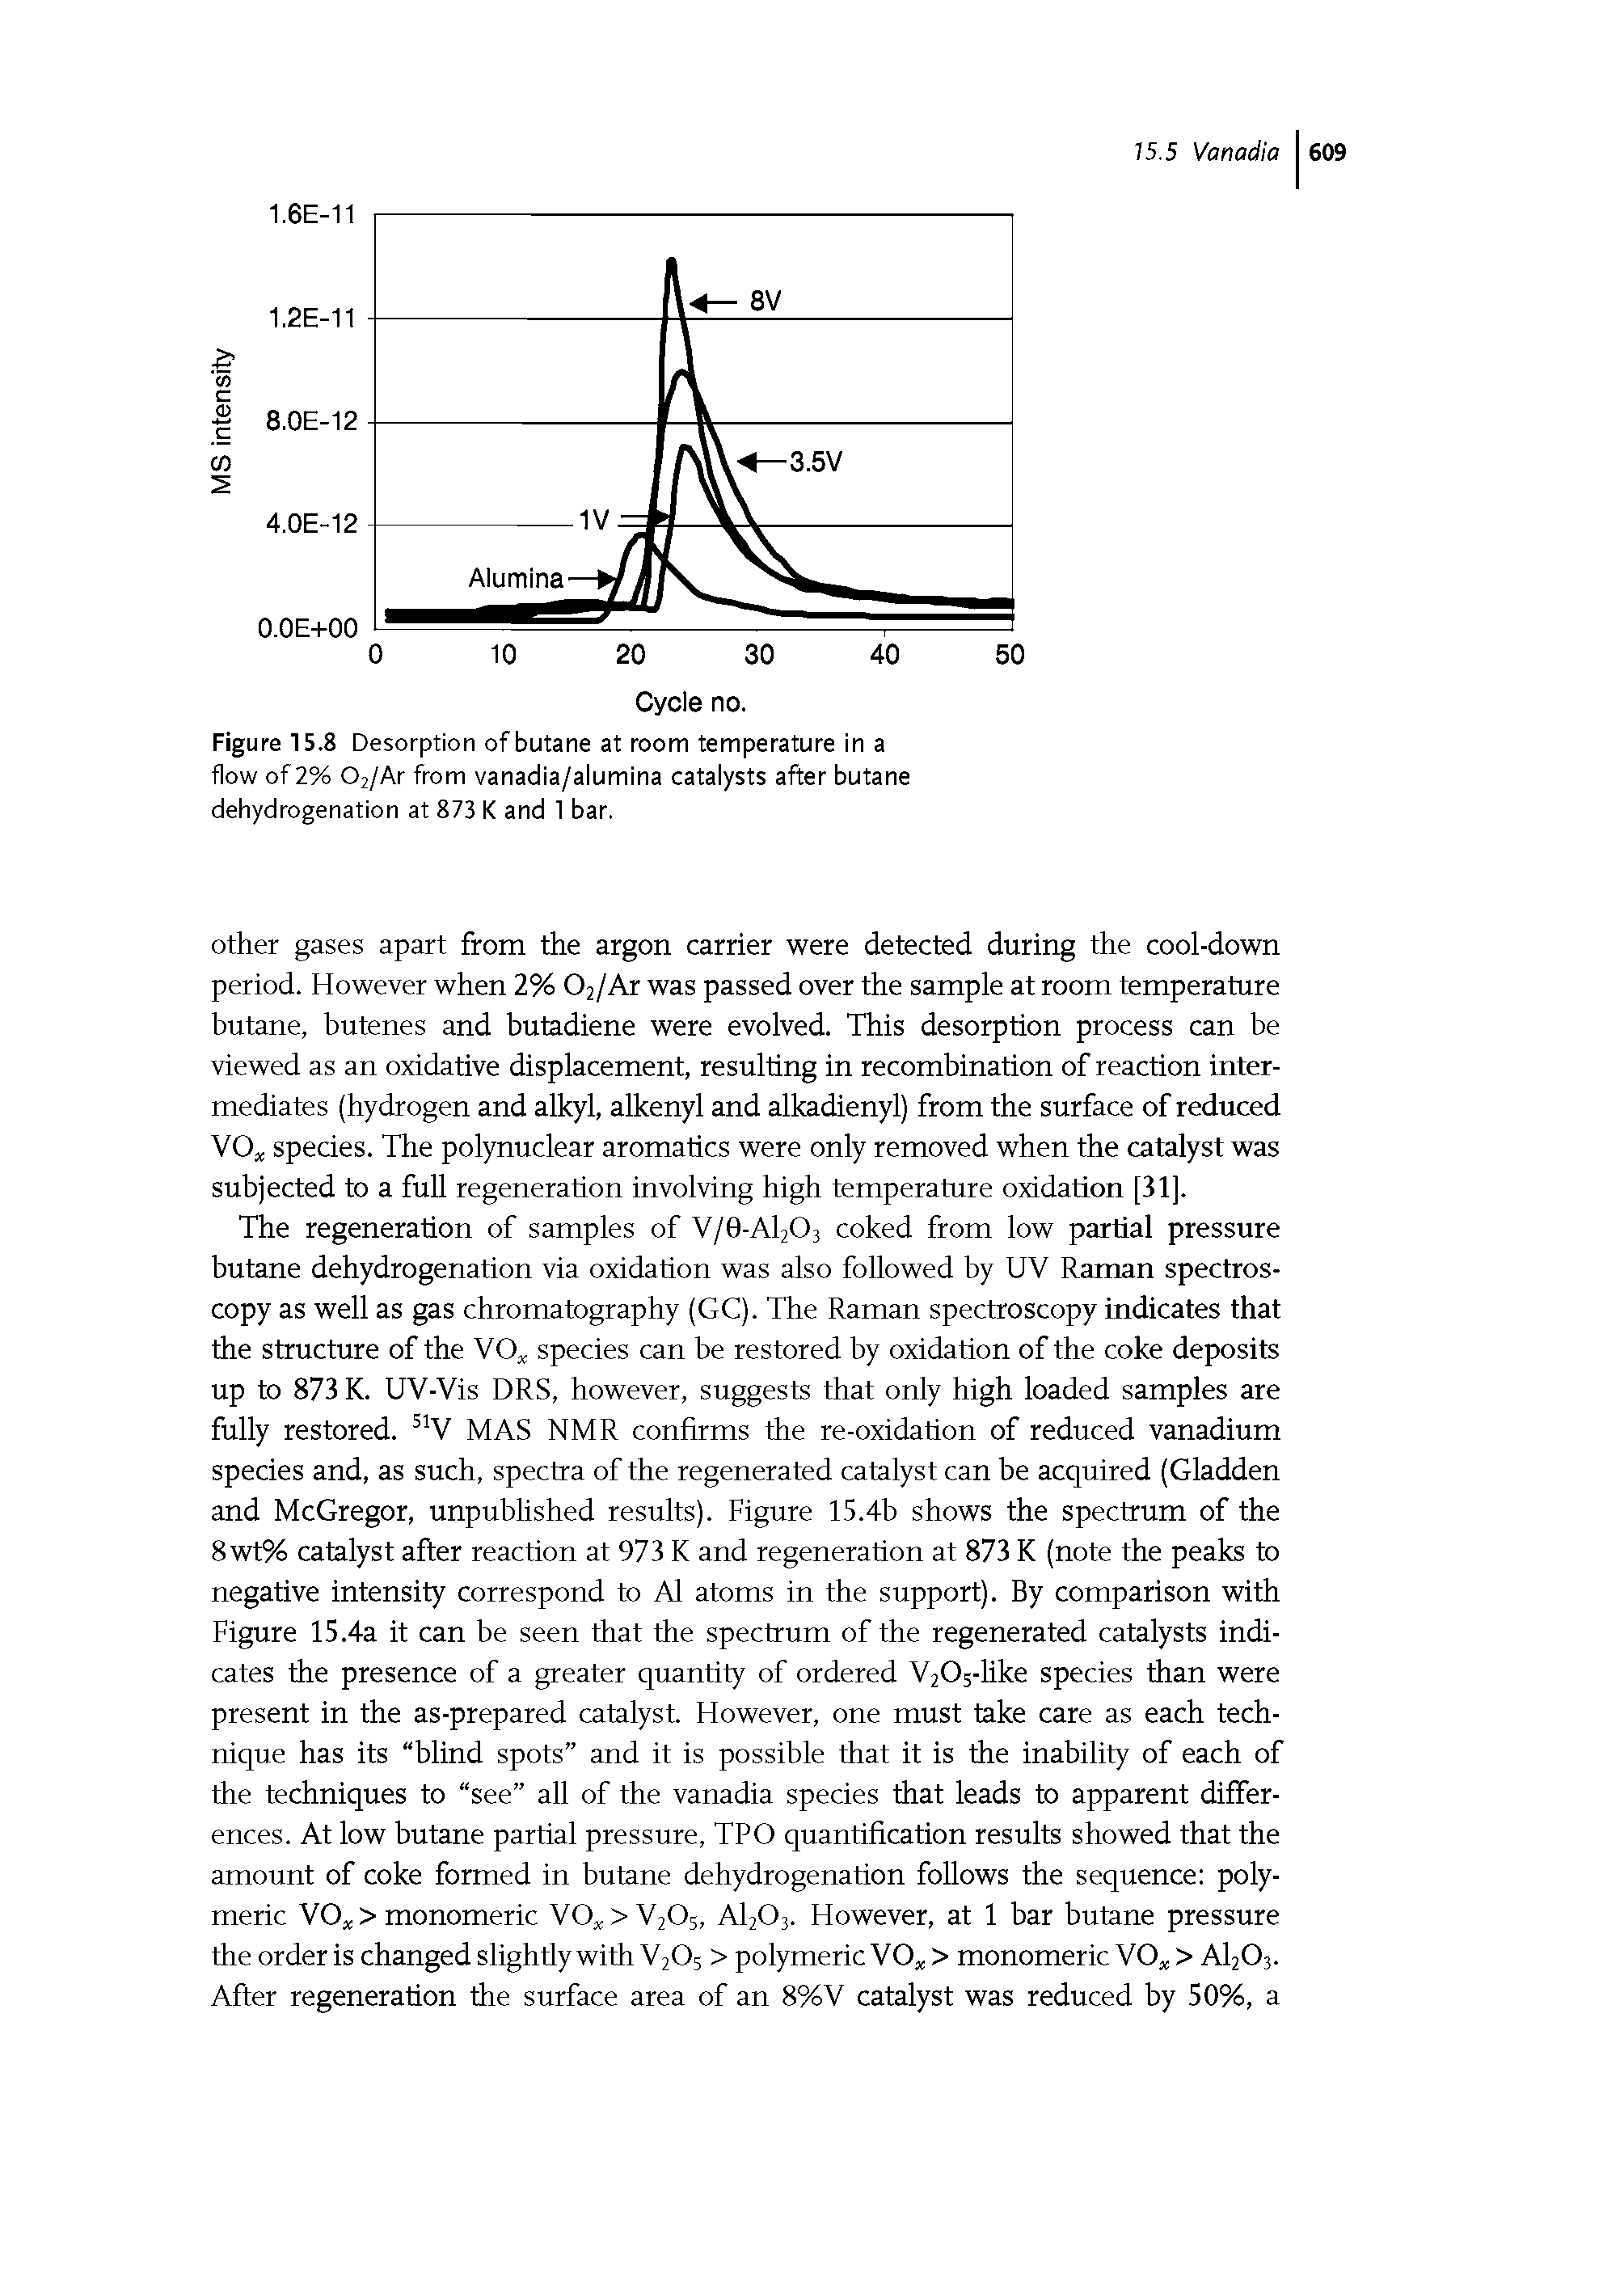 Figure 15.8 Desorption of butane at room temperature in a flow of 2% 02/Ar from vanadia/alumina catalysts after butane dehydrogenation at 873 K and 1 bar.